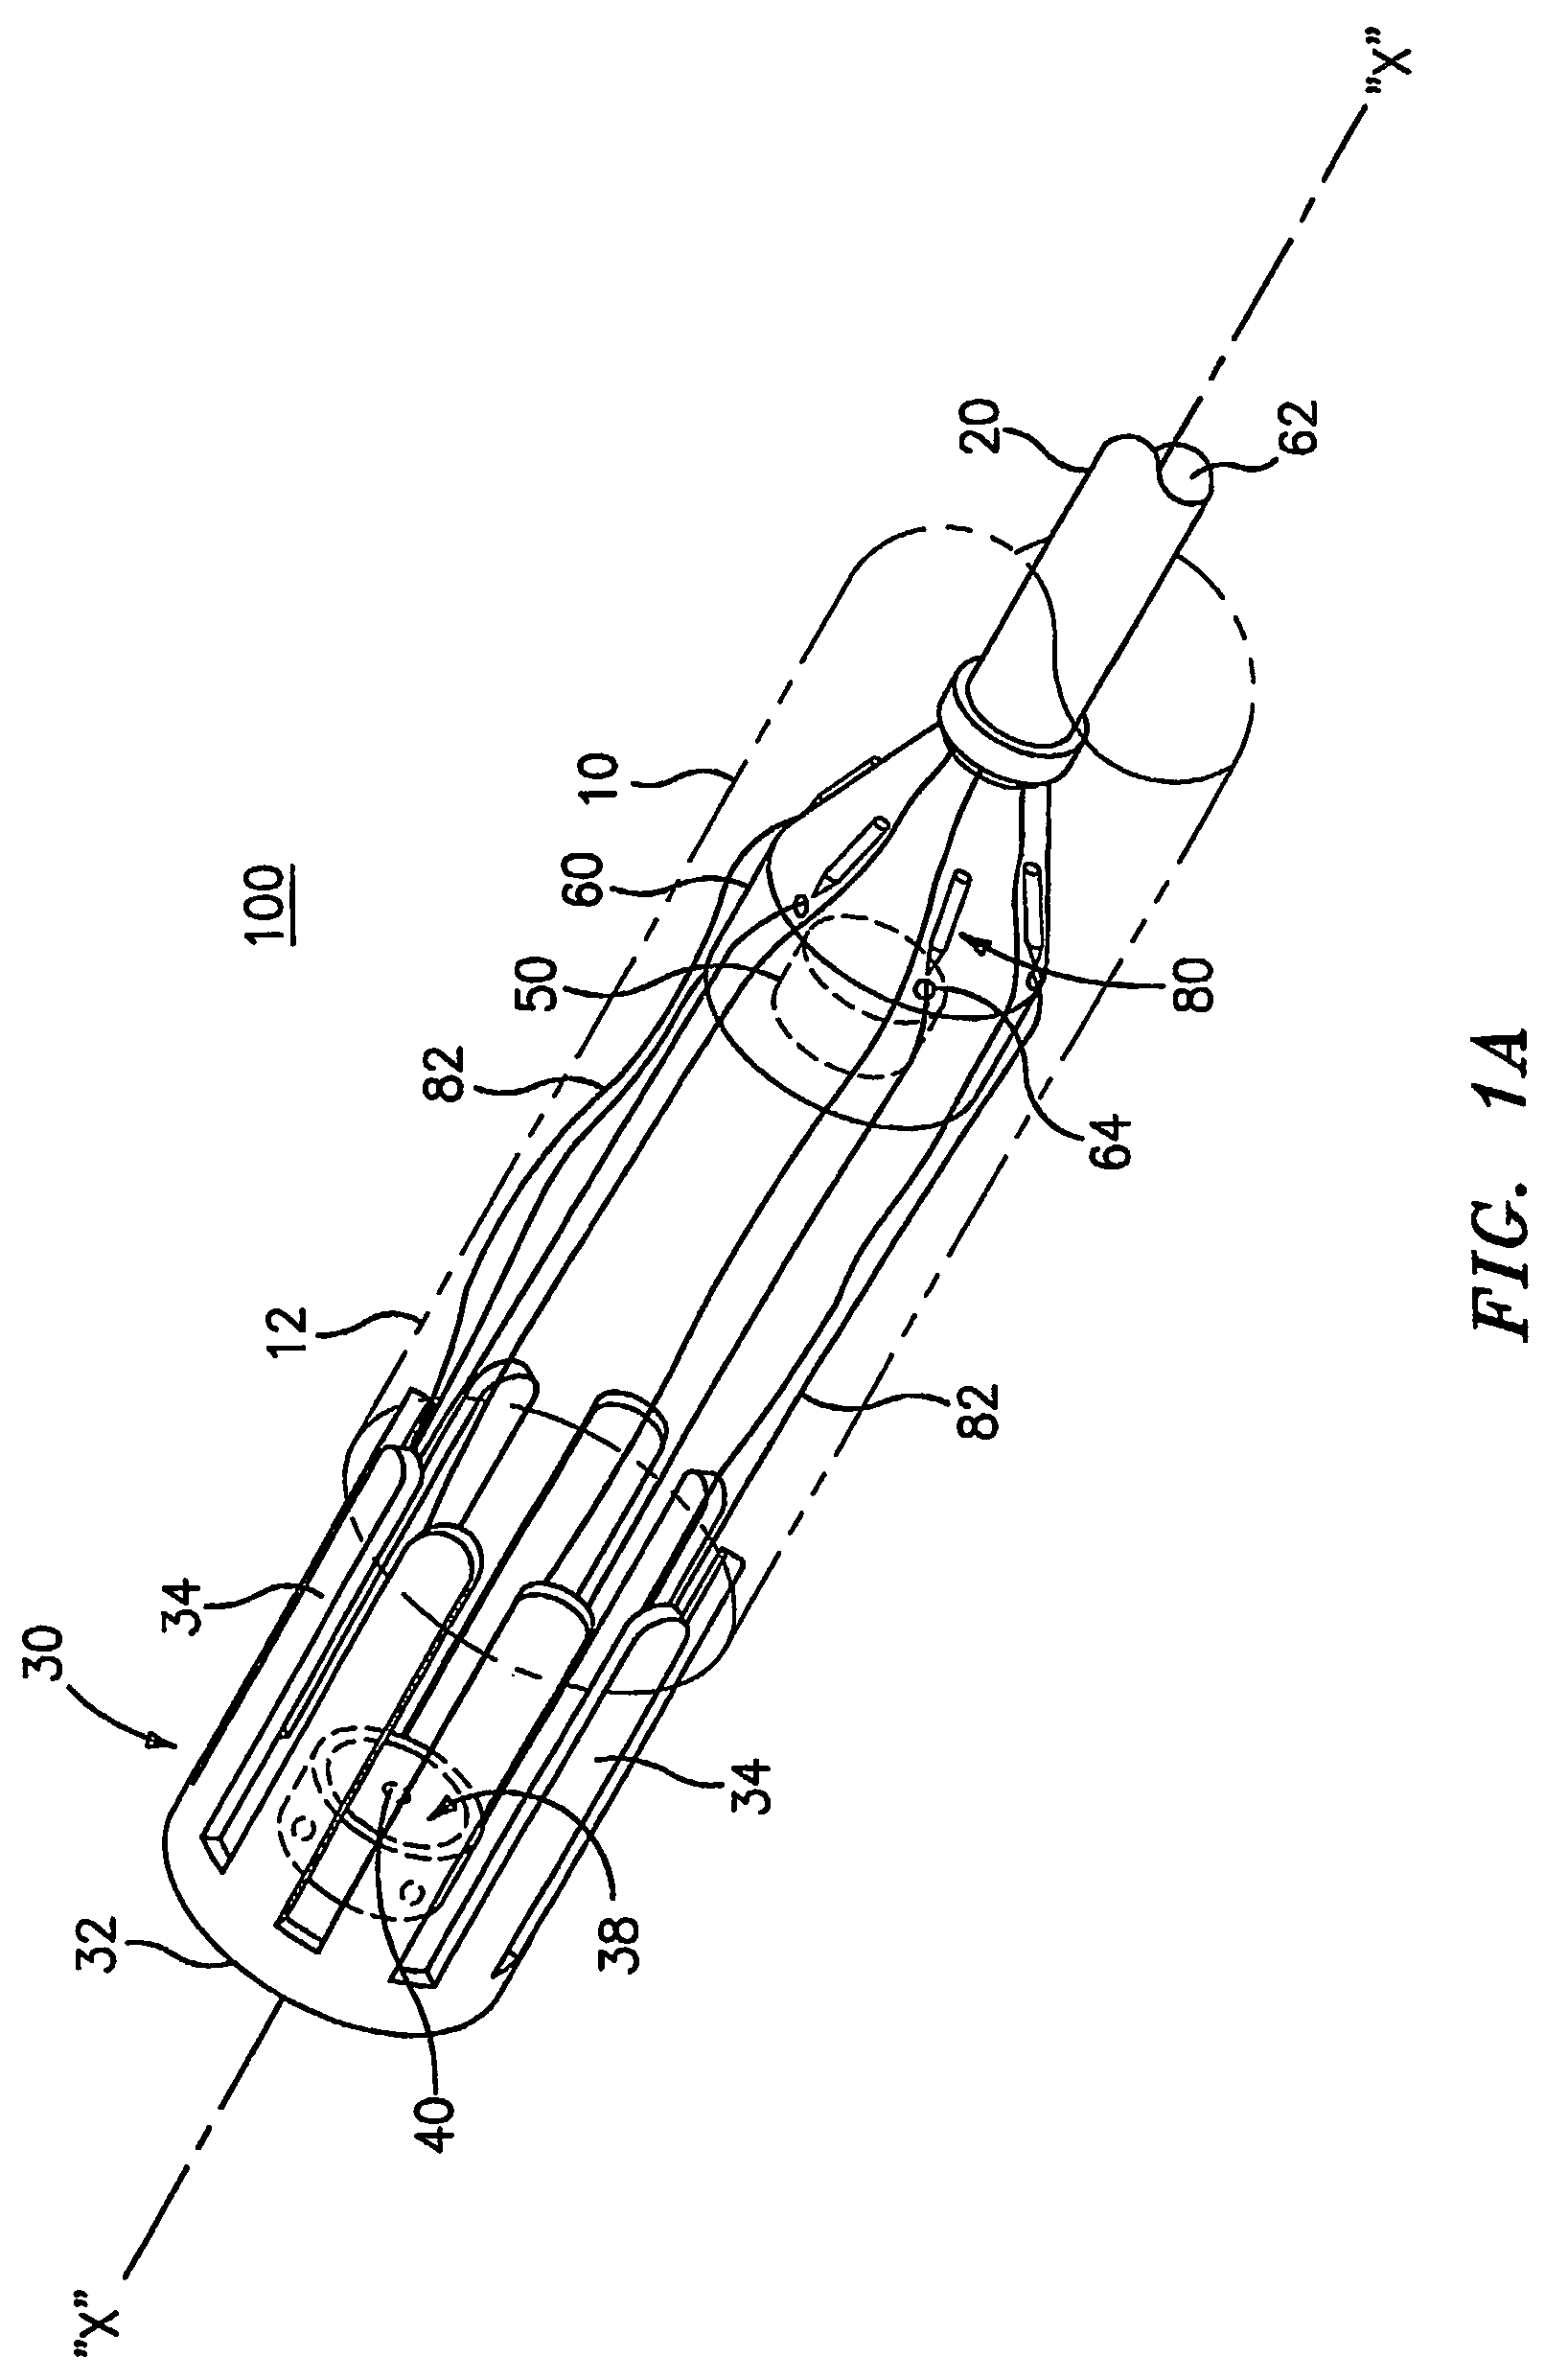 Method and apparatus for radical prostatectomy anastomosis including an anchor for engaging a body vessel and deployable sutures